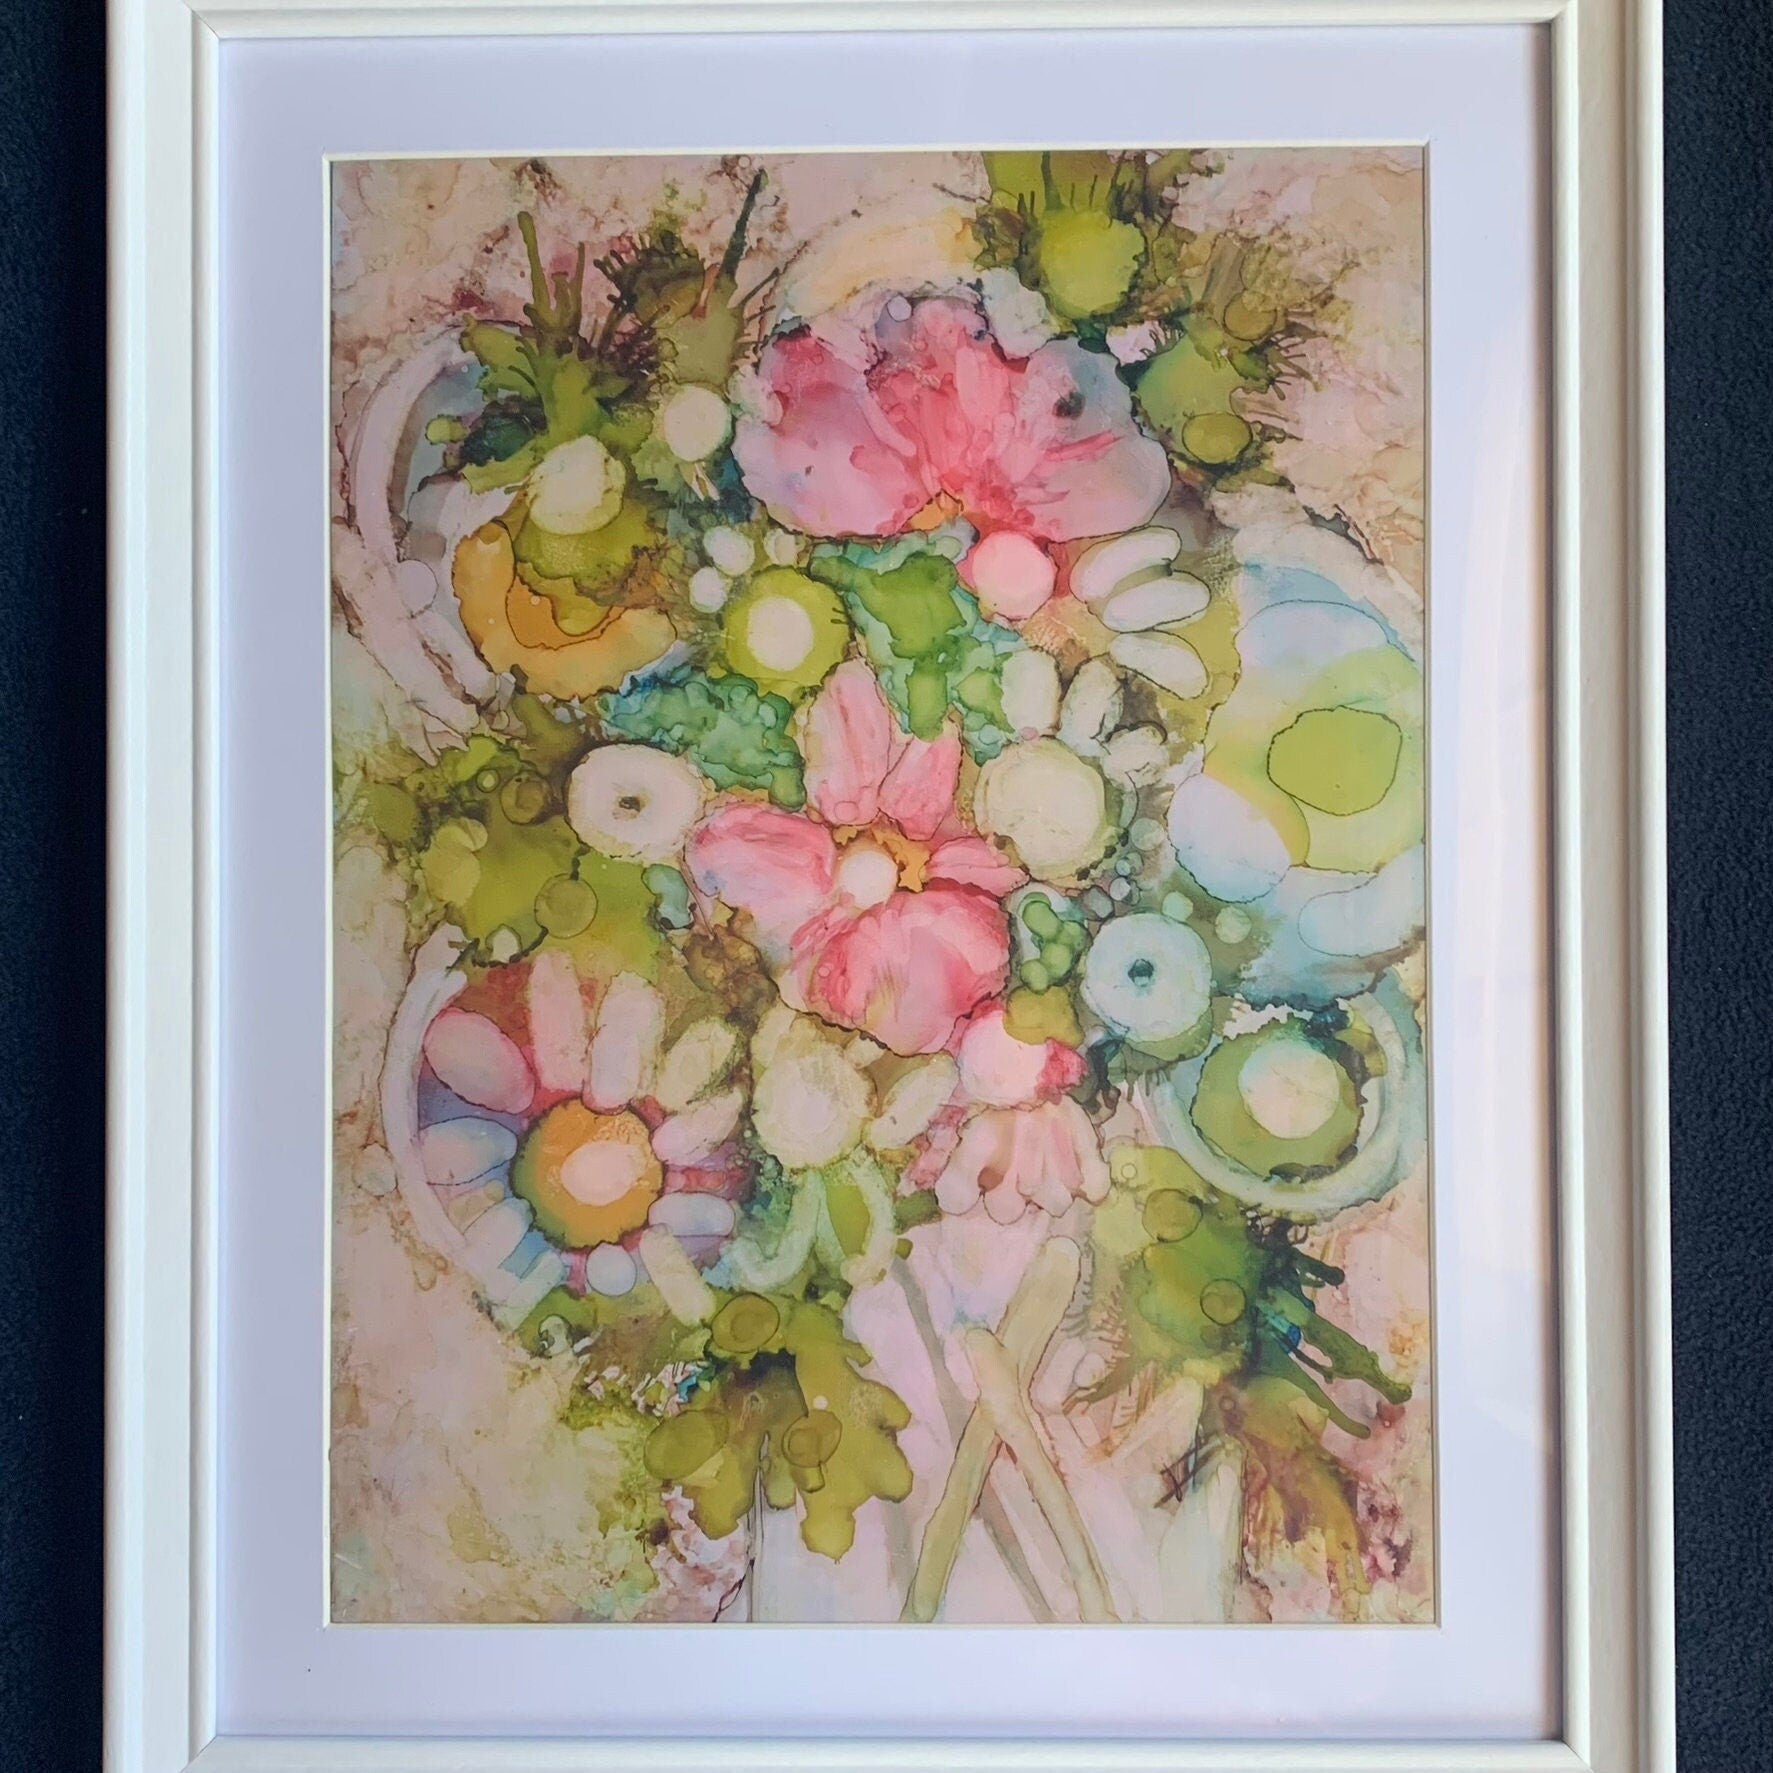 Floral Ink Abstract Pastel Painting #2 Rainbow colors Whimsical art One of a kind nature wall art Garden decor feminine flower lover gift